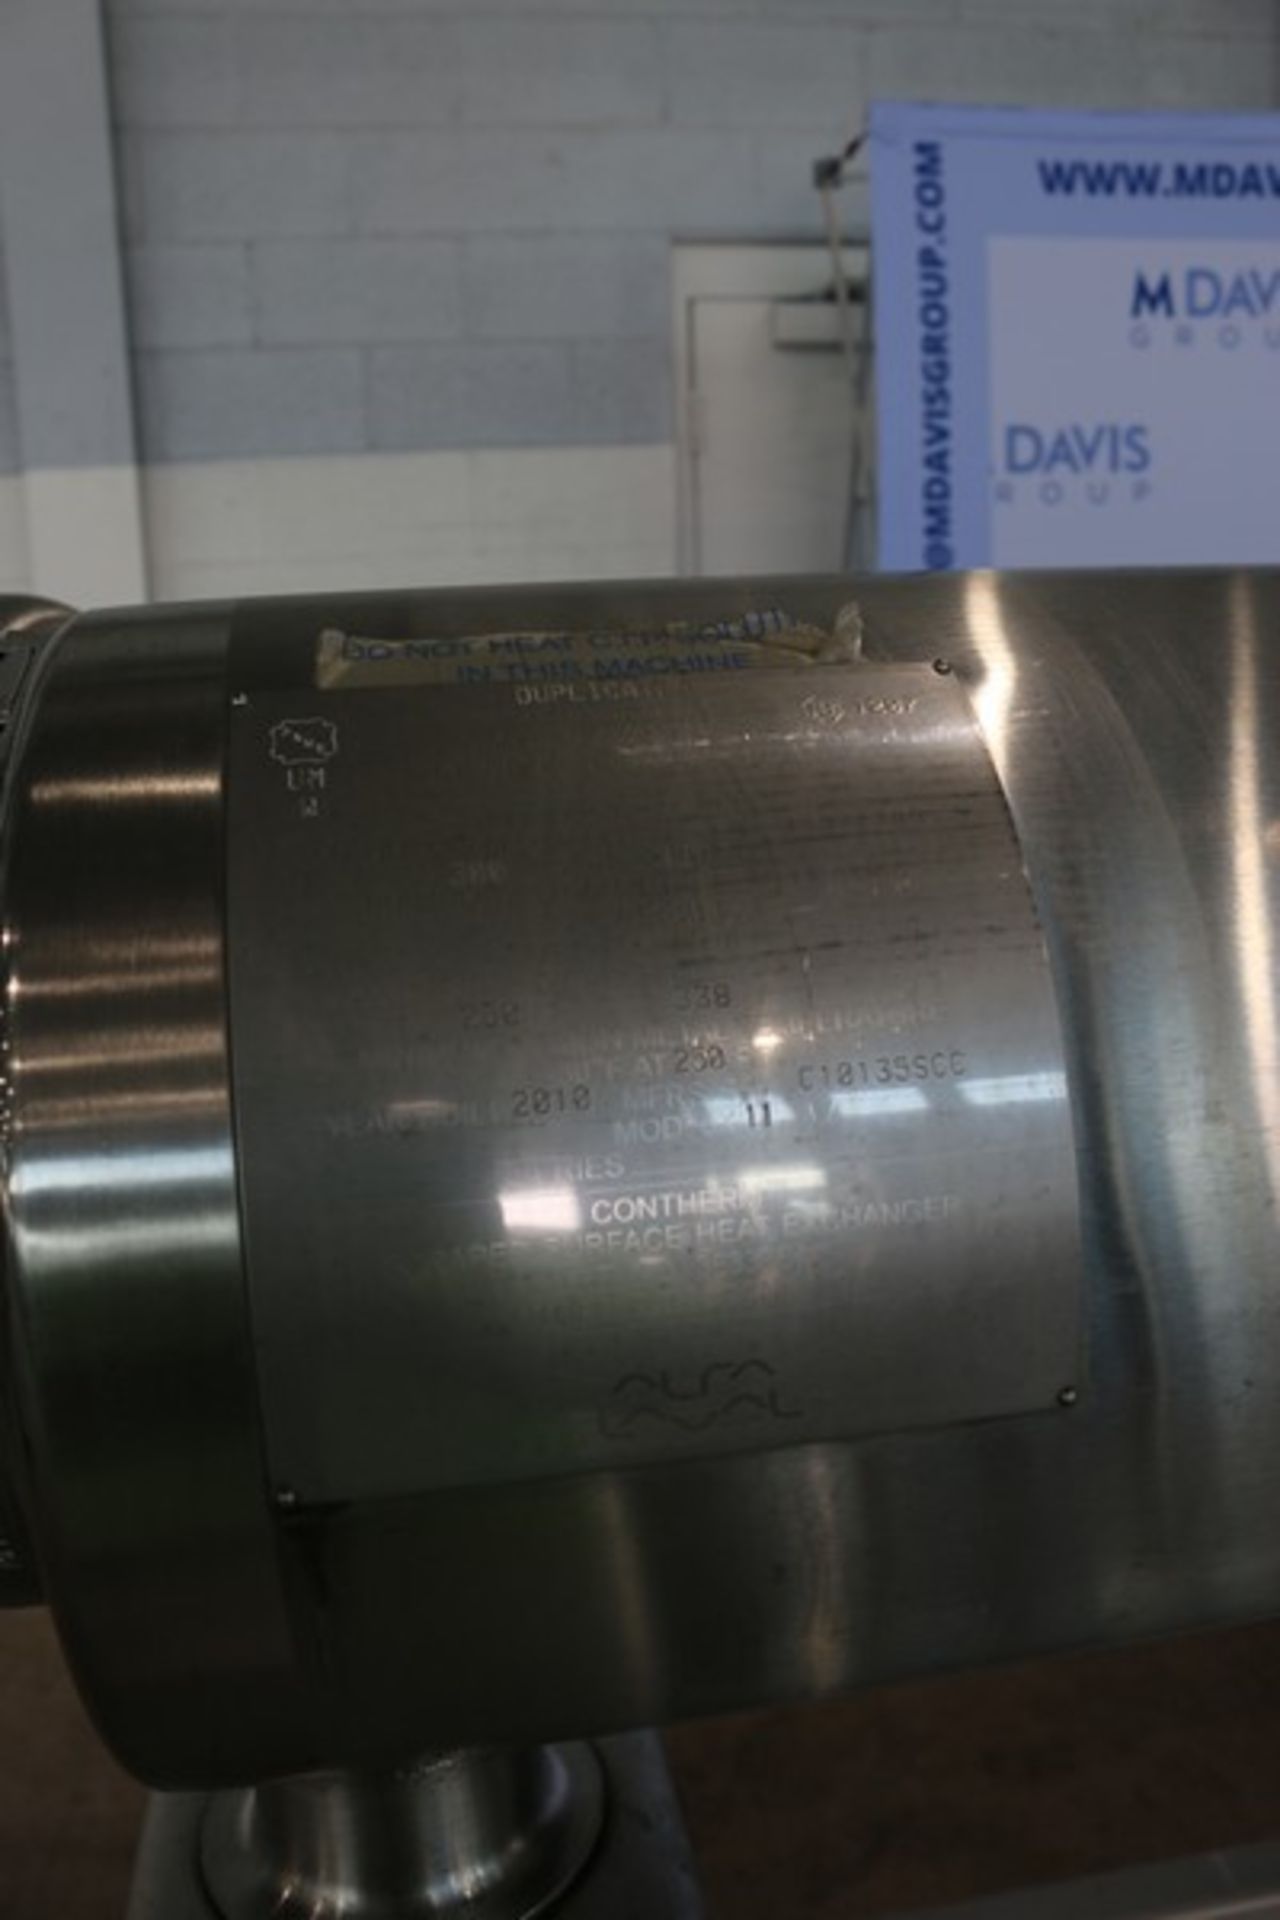 2010 Alfa-Laval Contherm 2-Barrel S/S Scrape Surface Heat Exchanger, M/N 6x11, MAWP 300 PSI @ 338 F, - Image 11 of 12